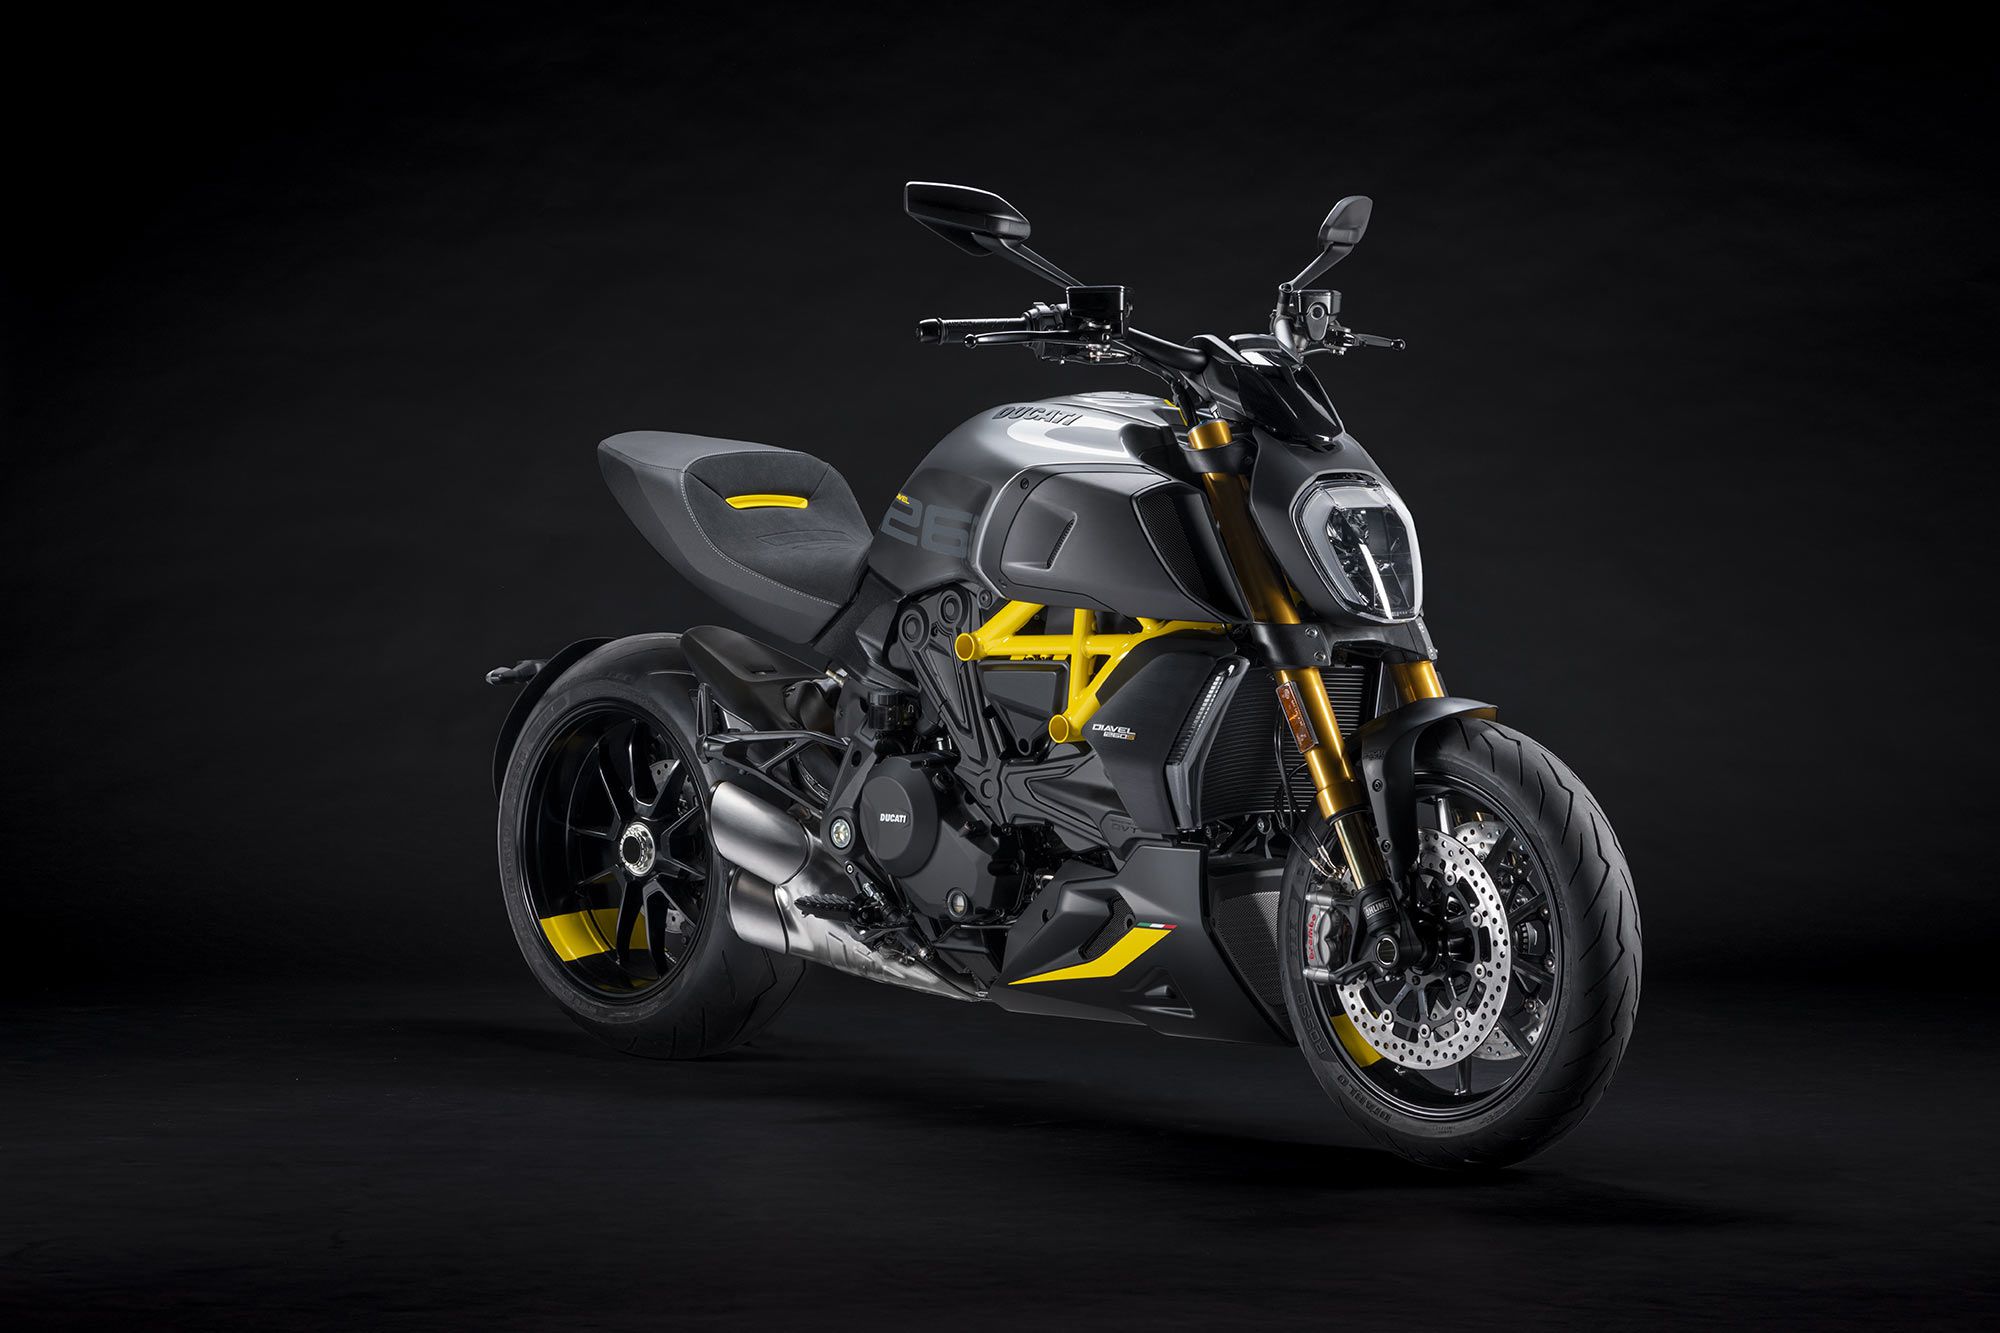 The Ducati Diavel 1260 S Black and Steel will be available starting September 2021.